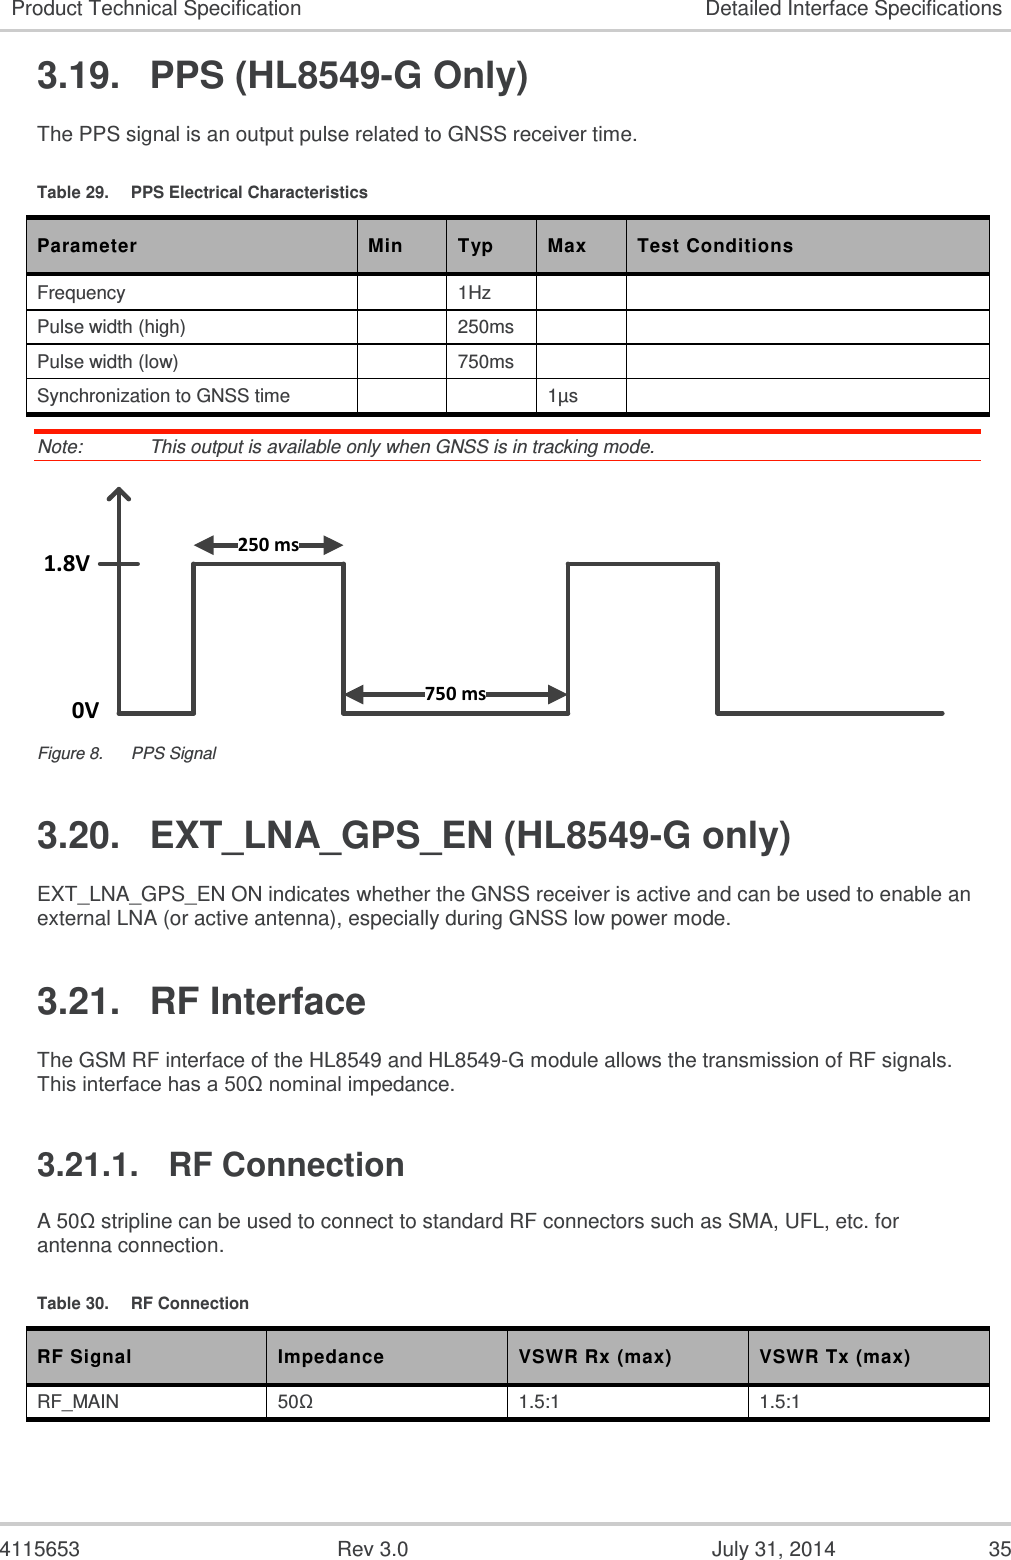  4115653  Rev 3.0  July 31, 2014  35 Product Technical Specification Detailed Interface Specifications 3.19.  PPS (HL8549-G Only) The PPS signal is an output pulse related to GNSS receiver time. Table 29.  PPS Electrical Characteristics Parameter Min Typ Max Test Conditions Frequency  1Hz   Pulse width (high)  250ms   Pulse width (low)  750ms   Synchronization to GNSS time   1µs  Note:   This output is available only when GNSS is in tracking mode. 250 ms1.8V750 ms0V Figure 8.  PPS Signal 3.20.  EXT_LNA_GPS_EN (HL8549-G only) EXT_LNA_GPS_EN ON indicates whether the GNSS receiver is active and can be used to enable an external LNA (or active antenna), especially during GNSS low power mode. 3.21.  RF Interface The GSM RF interface of the HL8549 and HL8549-G module allows the transmission of RF signals. This interface has a 50Ω nominal impedance. 3.21.1.  RF Connection A 50Ω stripline can be used to connect to standard RF connectors such as SMA, UFL, etc. for antenna connection. Table 30.  RF Connection RF Signal Impedance VSWR Rx (max) VSWR Tx (max) RF_MAIN 50Ω 1.5:1 1.5:1 